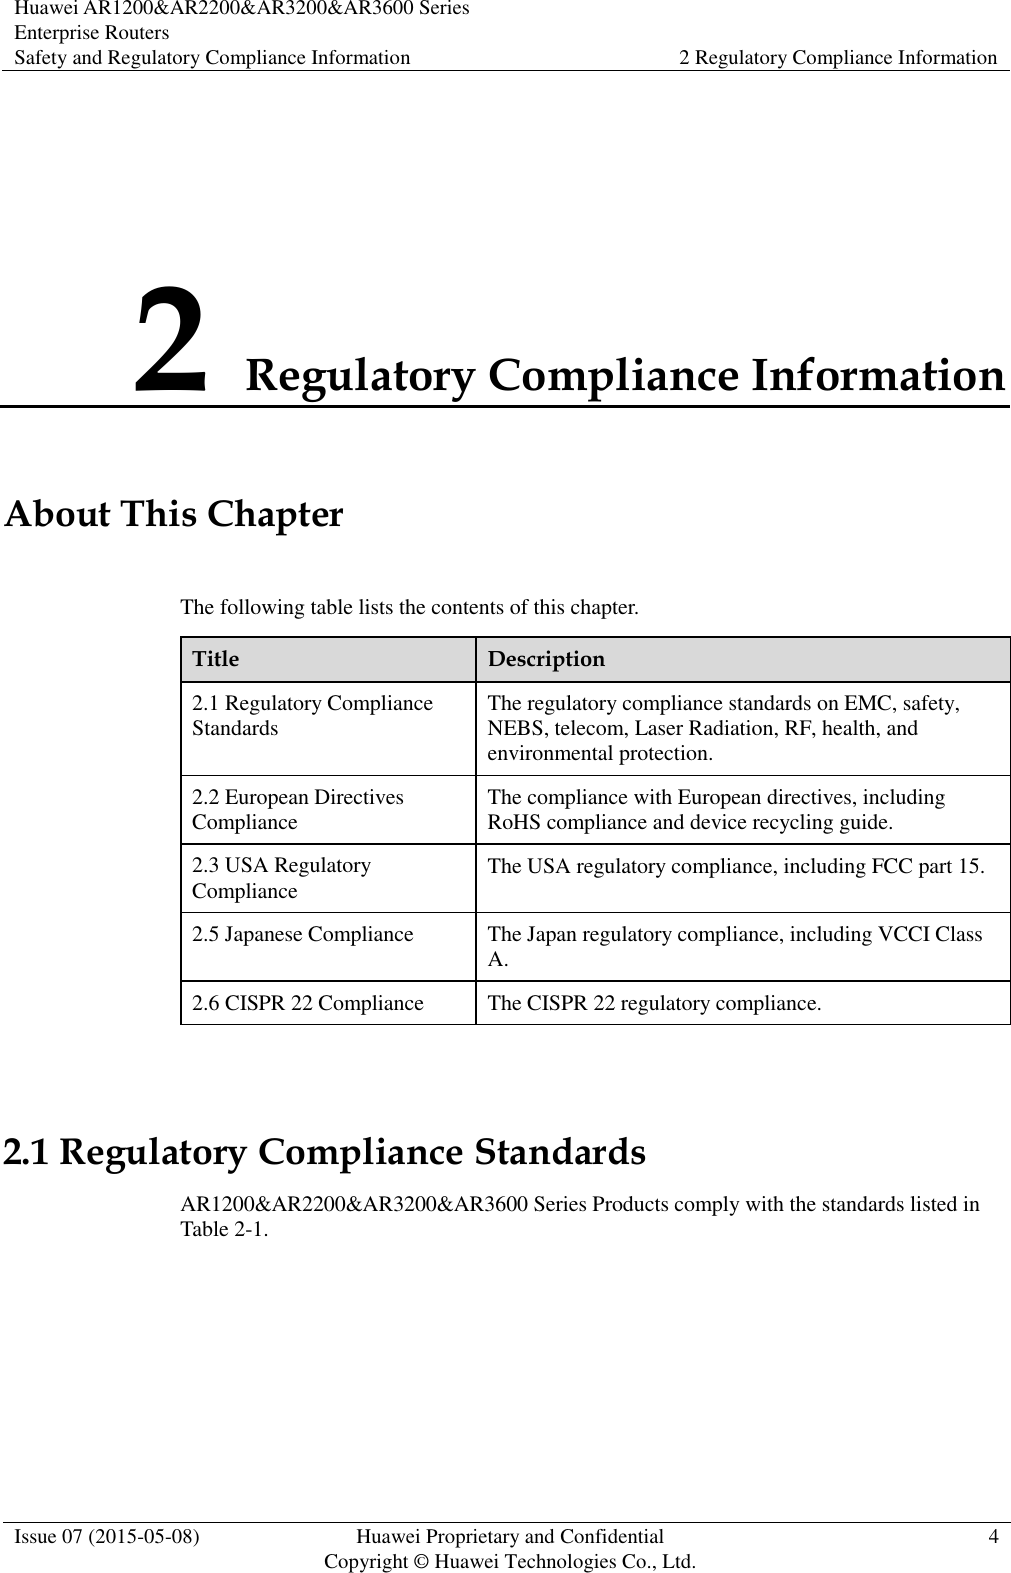 Huawei AR1200&amp;AR2200&amp;AR3200&amp;AR3600 Series Enterprise Routers Safety and Regulatory Compliance Information 2 Regulatory Compliance Information  Issue 07 (2015-05-08) Huawei Proprietary and Confidential           Copyright © Huawei Technologies Co., Ltd. 4  2 Regulatory Compliance Information About This Chapter The following table lists the contents of this chapter. Title Description 2.1 Regulatory Compliance Standards The regulatory compliance standards on EMC, safety, NEBS, telecom, Laser Radiation, RF, health, and environmental protection. 2.2 European Directives Compliance The compliance with European directives, including RoHS compliance and device recycling guide. 2.3 USA Regulatory Compliance The USA regulatory compliance, including FCC part 15. 2.5 Japanese Compliance The Japan regulatory compliance, including VCCI Class A. 2.6 CISPR 22 Compliance The CISPR 22 regulatory compliance.  2.1 Regulatory Compliance Standards AR1200&amp;AR2200&amp;AR3200&amp;AR3600 Series Products comply with the standards listed in Table 2-1. 